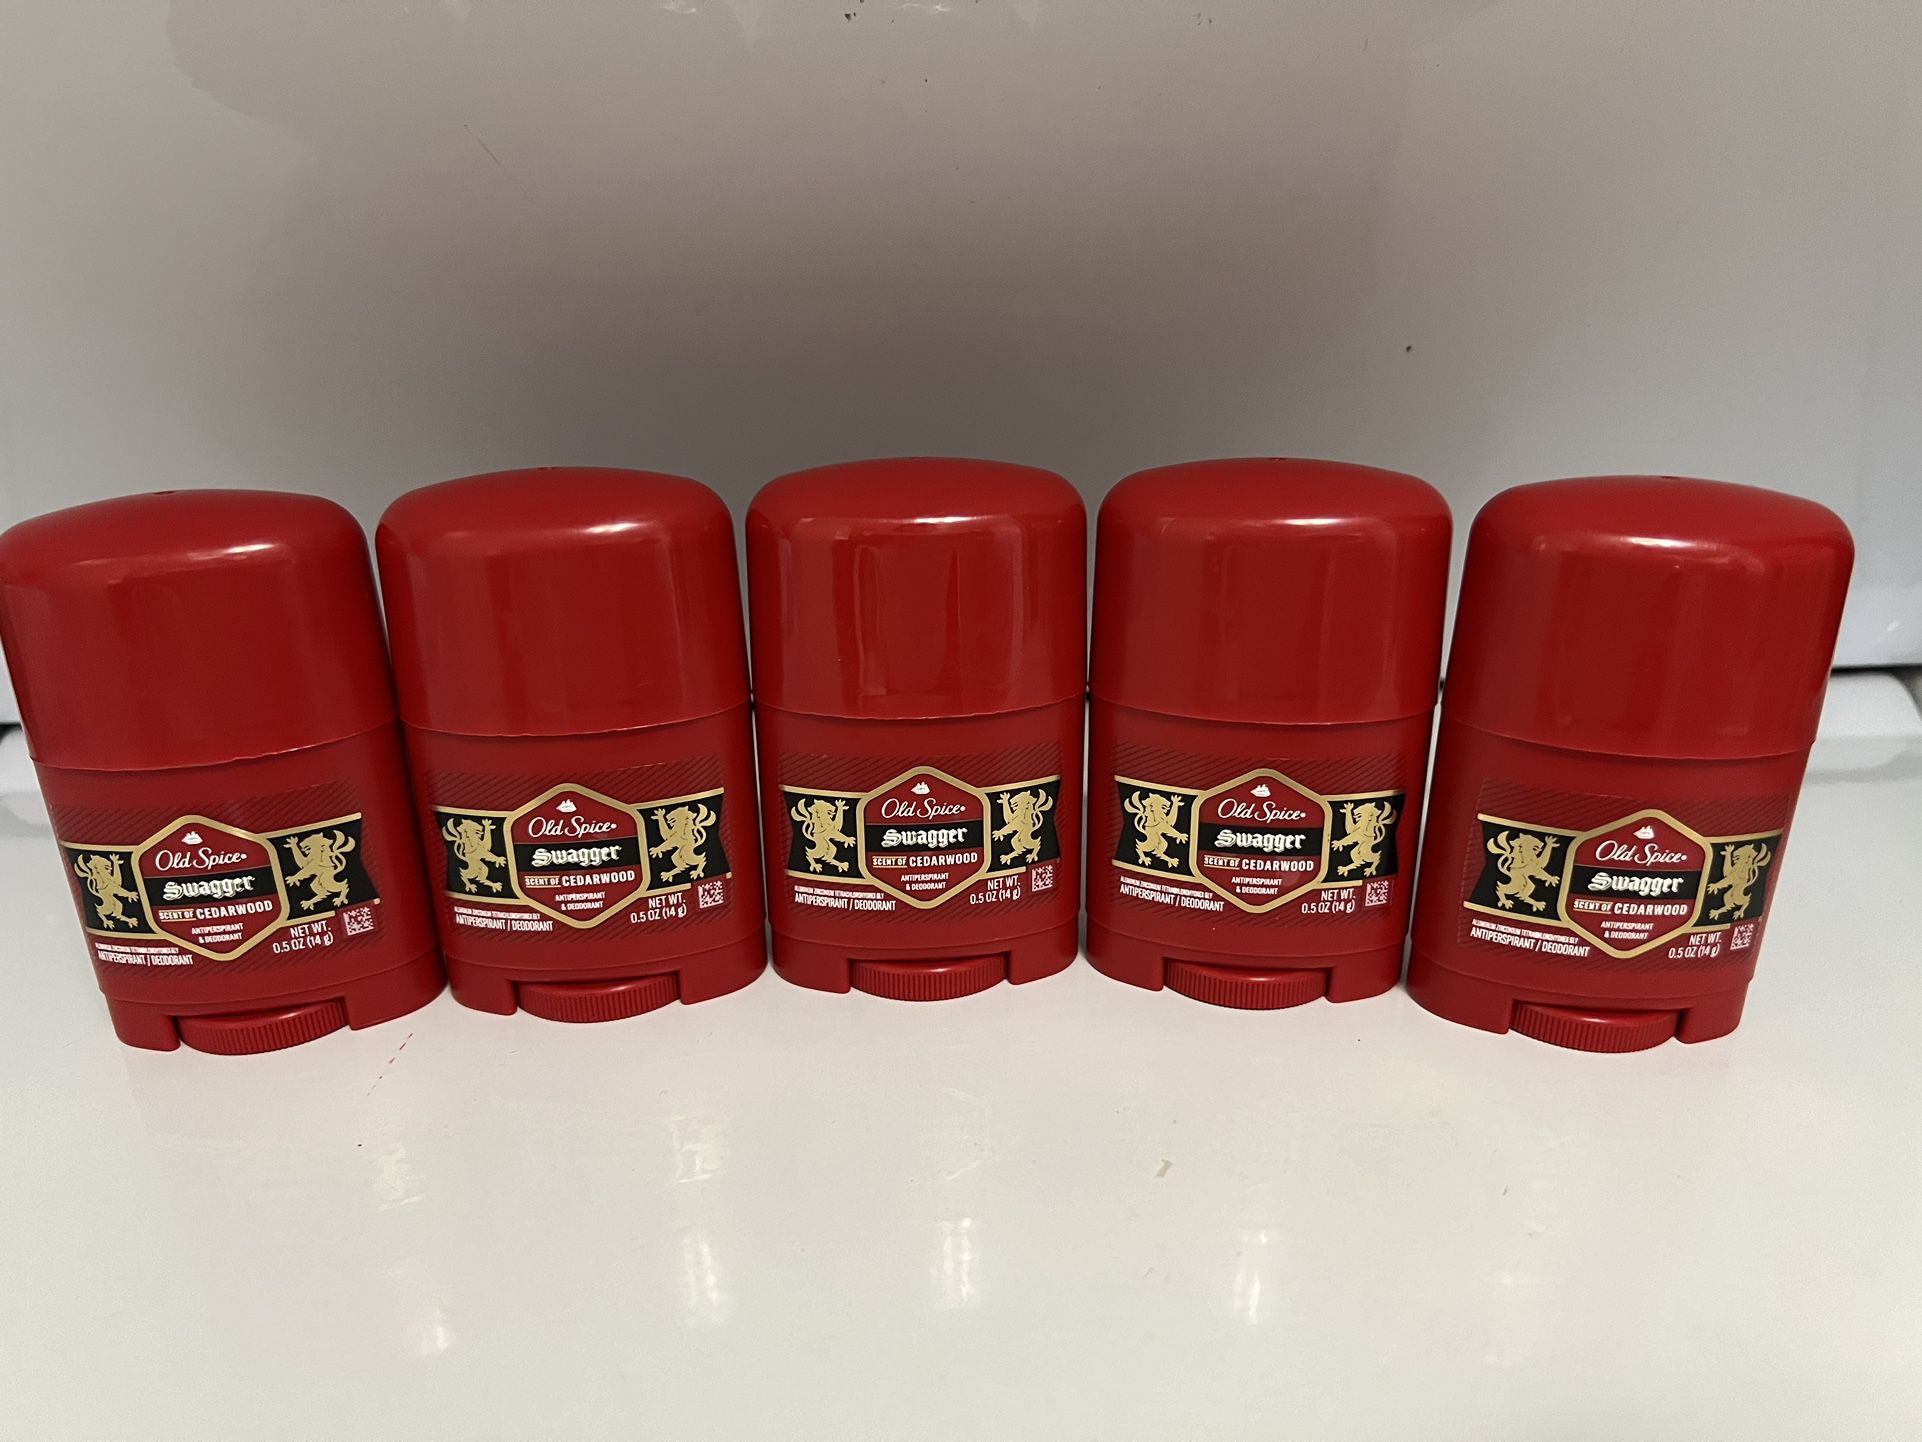 Old Spice 0,5 oz travel size deodorant all for $5